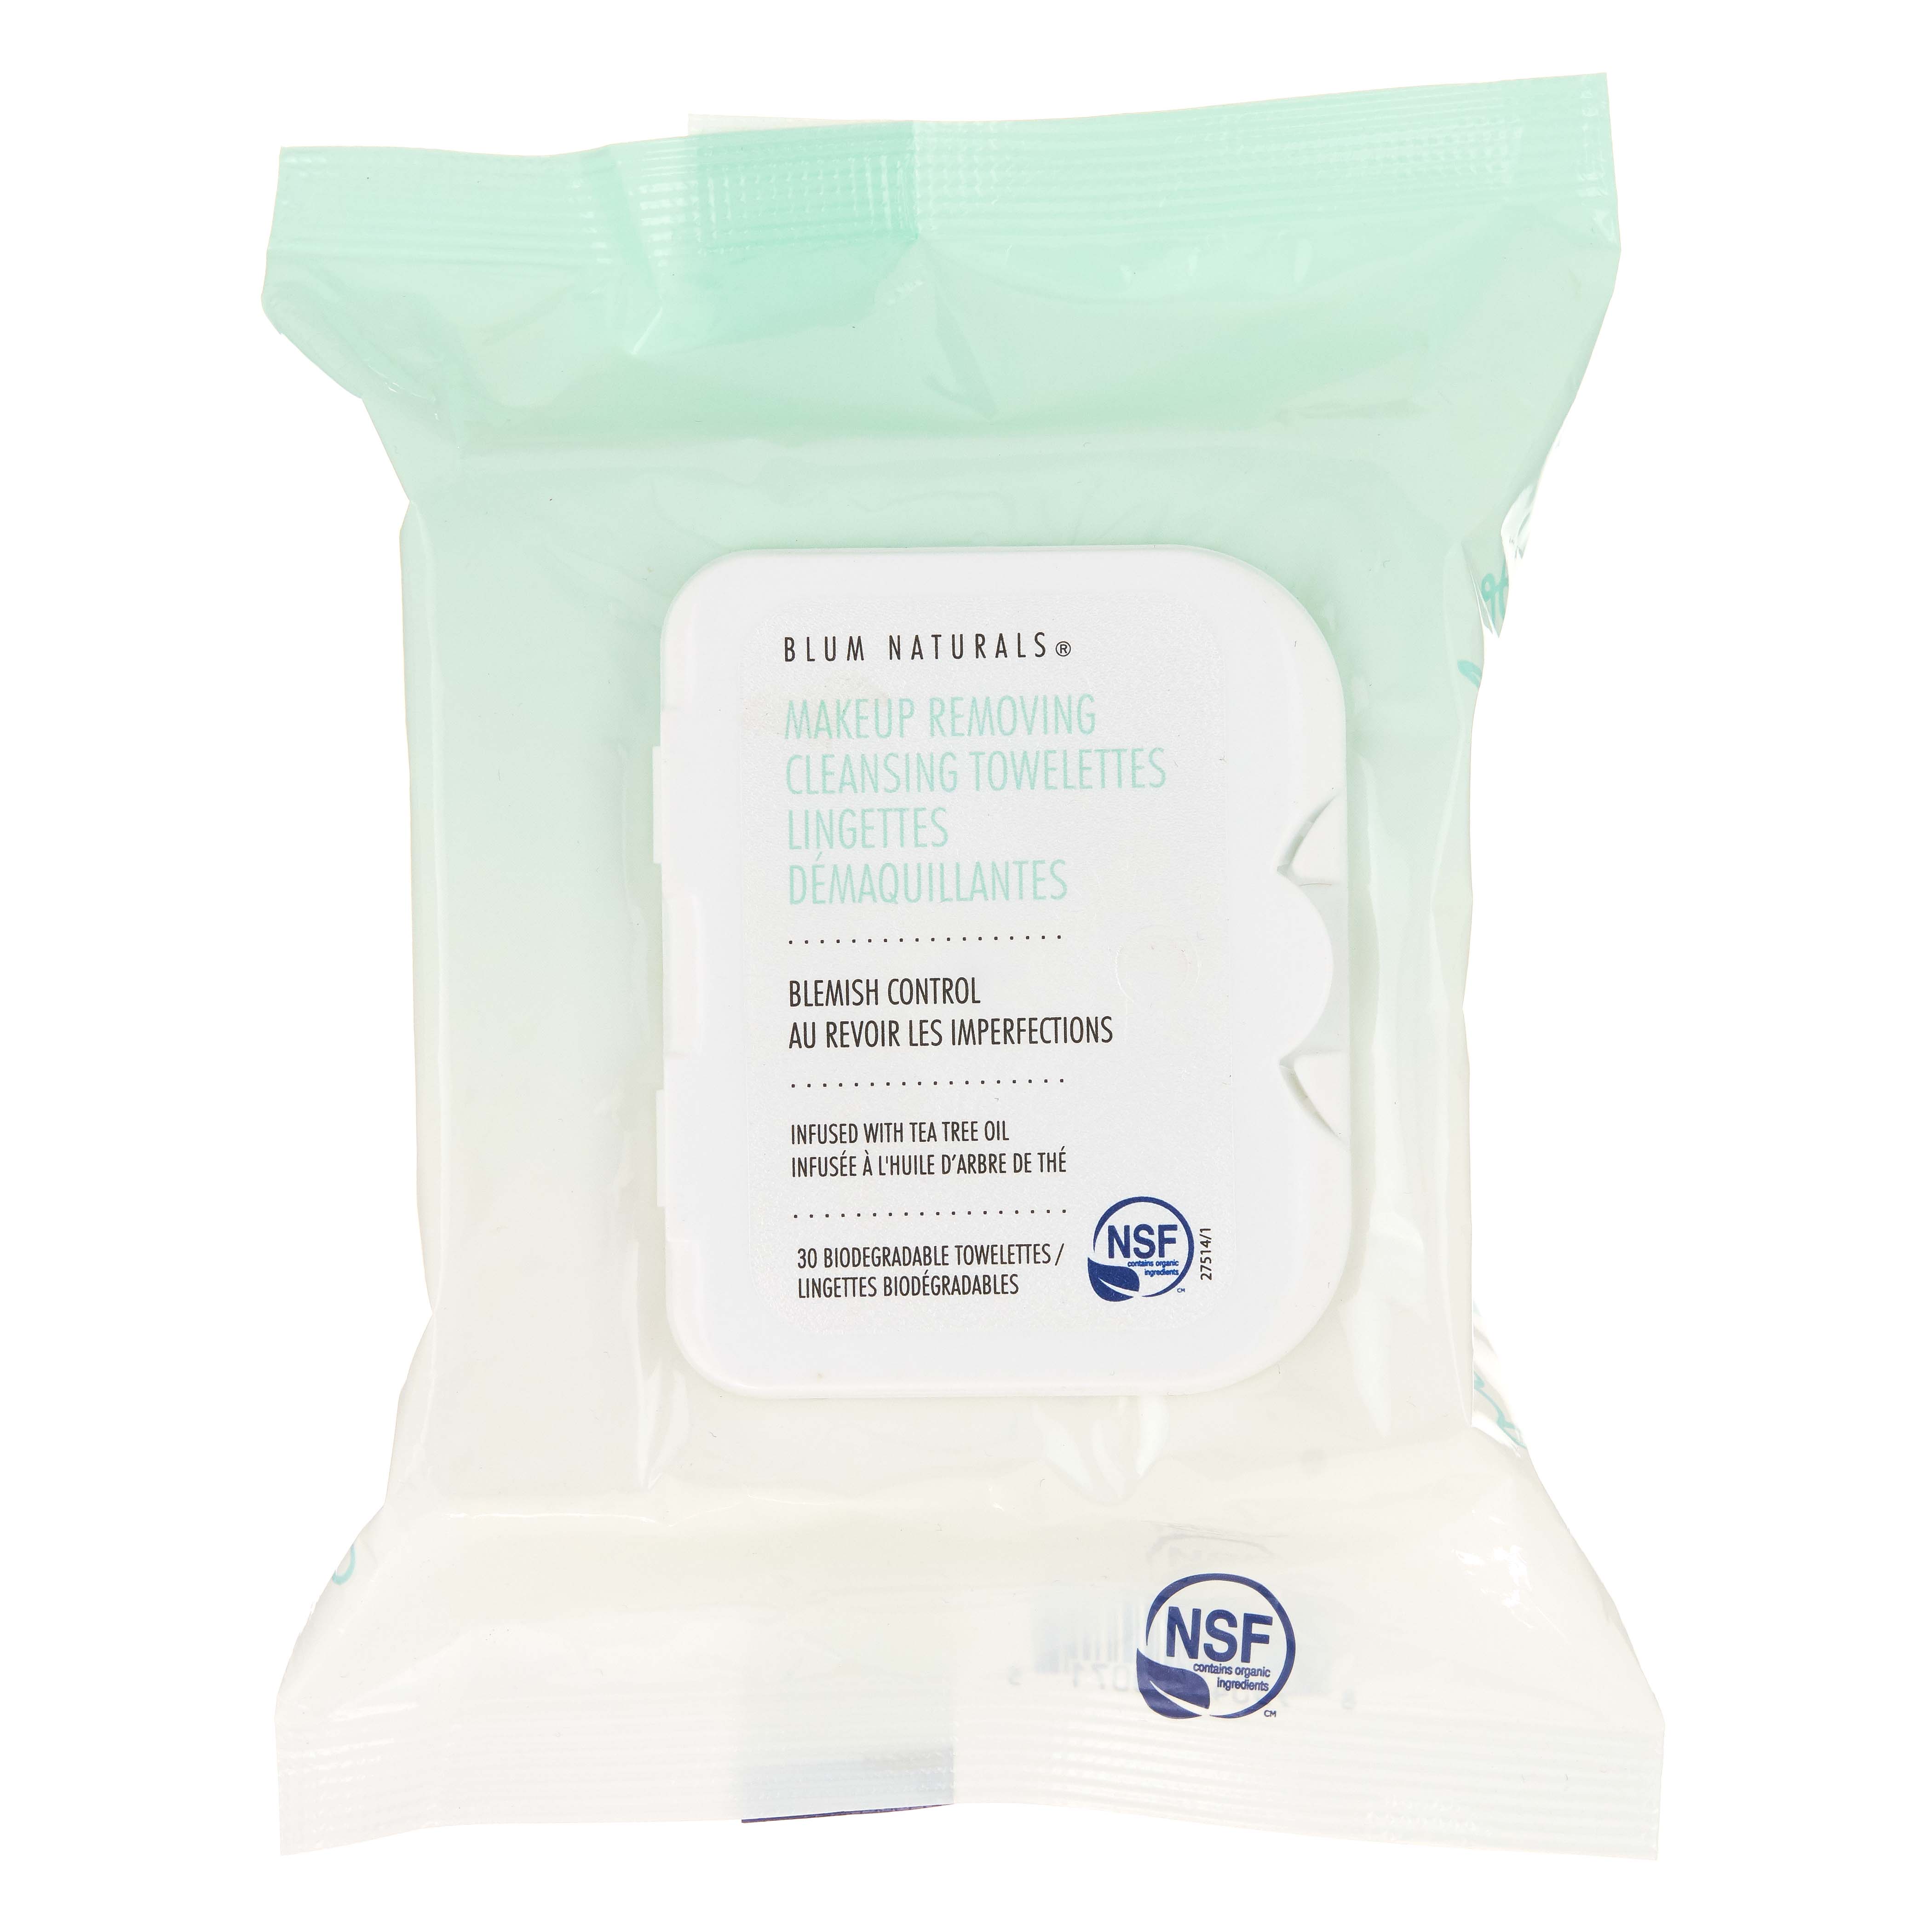 Blûm Naturals® Combination/Oily Skin Daily Cleansing & Makeup Remover Towelettes